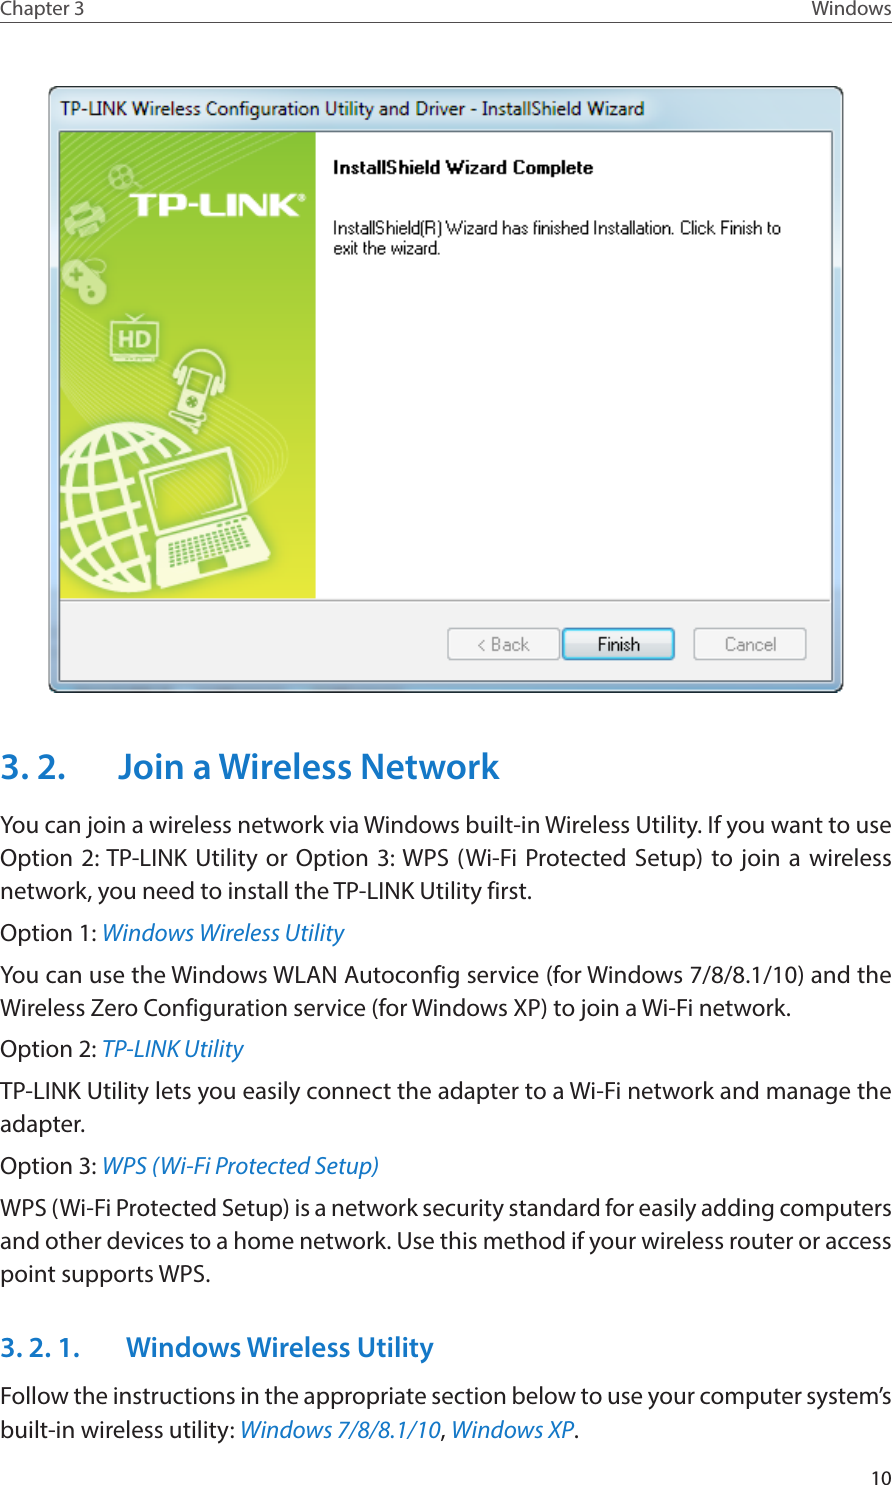 10Chapter 3 Windows3. 2.  Join a Wireless NetworkYou can join a wireless network via Windows built-in Wireless Utility. If you want to use Option 2: TP-LINK Utility or Option 3: WPS (Wi-Fi Protected Setup) to join a wireless network, you need to install the TP-LINK Utility first.Option 1: Windows Wireless UtilityYou can use the Windows WLAN Autoconfig service (for Windows 7/8/8.1/10) and the Wireless Zero Configuration service (for Windows XP) to join a Wi-Fi network.Option 2: TP-LINK UtilityTP-LINK Utility lets you easily connect the adapter to a Wi-Fi network and manage the adapter. Option 3: WPS (Wi-Fi Protected Setup)WPS (Wi-Fi Protected Setup) is a network security standard for easily adding computers and other devices to a home network. Use this method if your wireless router or access point supports WPS.3. 2. 1.   Windows Wireless UtilityFollow the instructions in the appropriate section below to use your computer system’s built-in wireless utility: Windows 7/8/8.1/10, Windows XP.